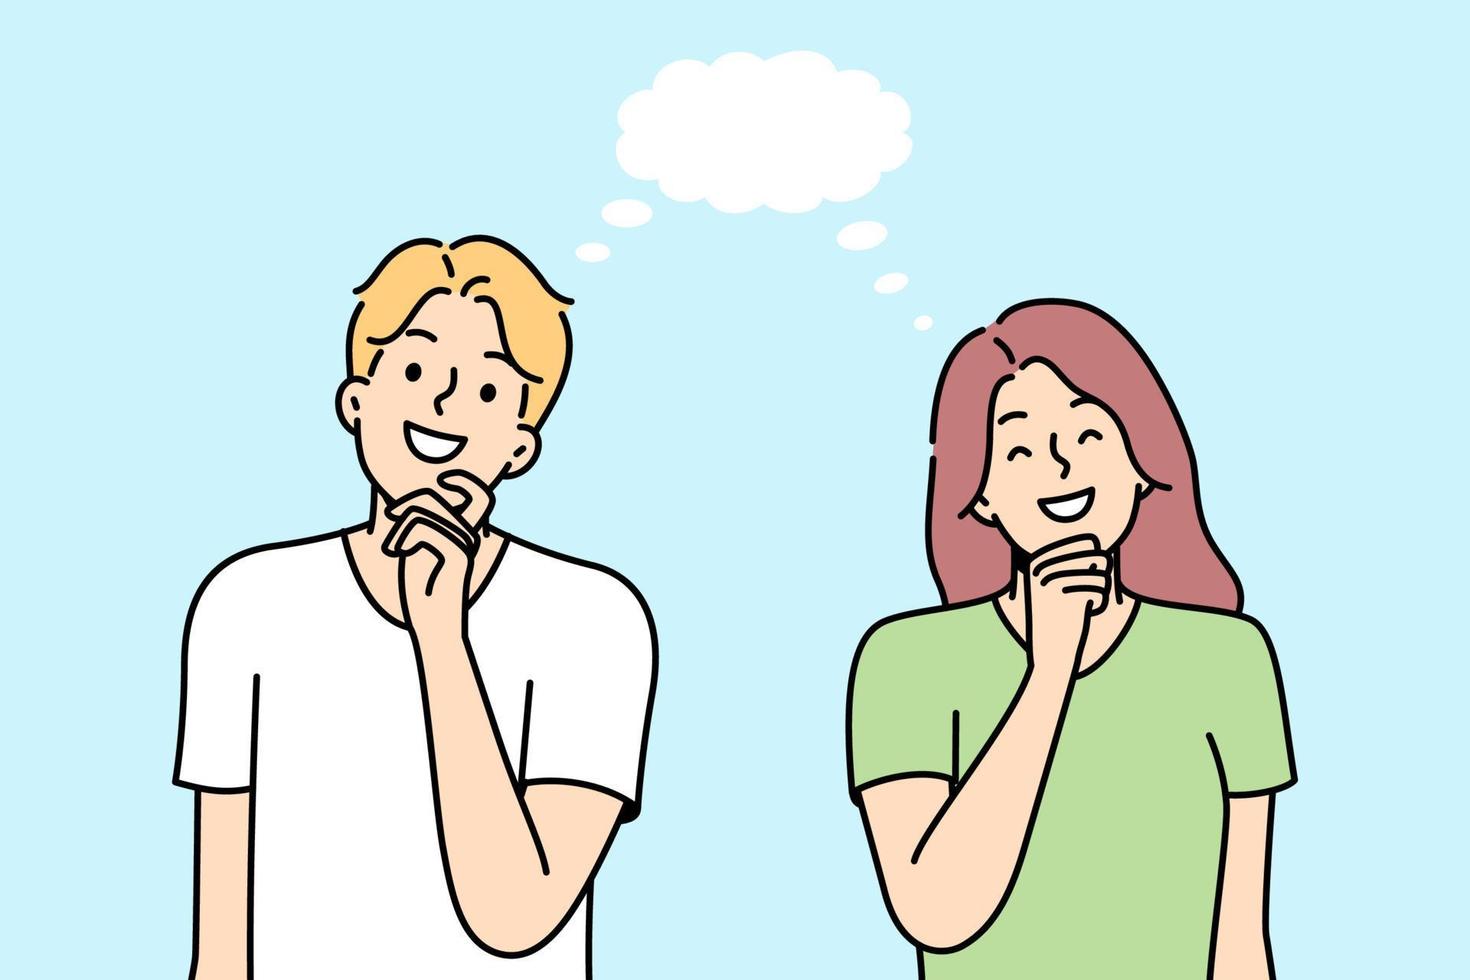 Girl, boy smile, think about something nice together. Empty speech bubble. Young couple dreaming. Positive imagination, fantasy, fancy ideas, cloud-castle, goal. Vector outline colored illustration.